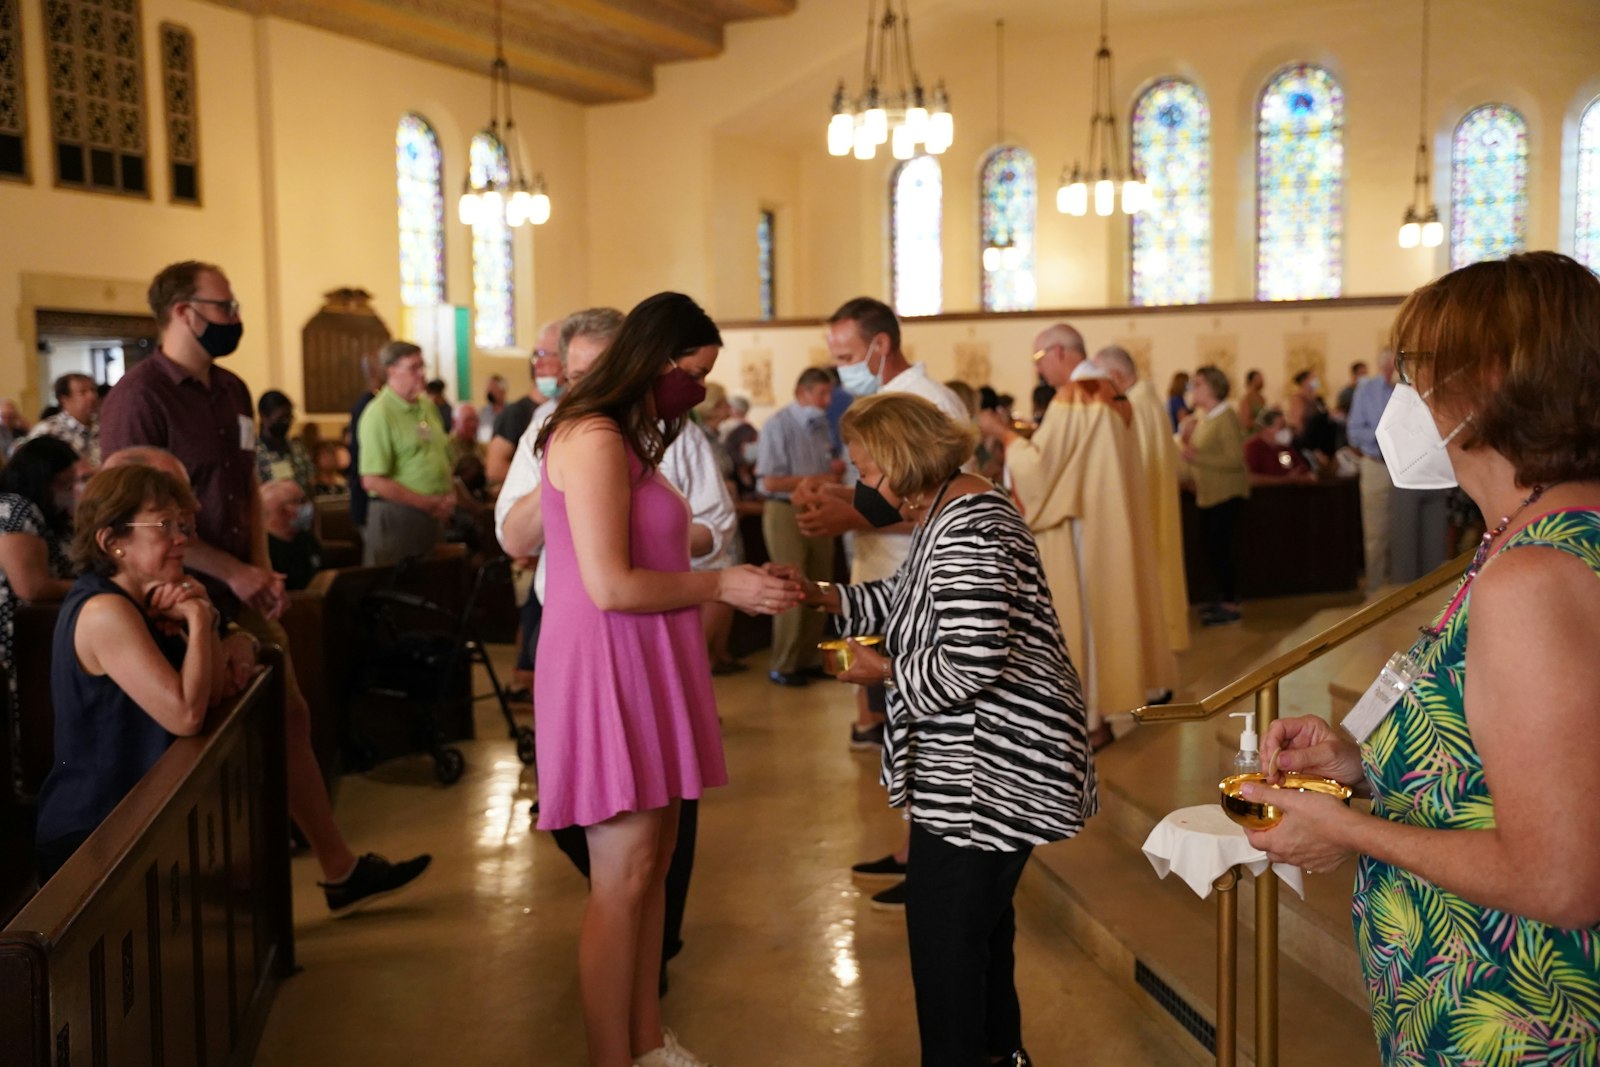 An extraordinary minister of holy Communion distributes Communion at Mass during the Gesu centennial celebration. Gesu parishioners often bring up the parish’s welcoming nature and involvement in the community as reasons why their parish stands out.